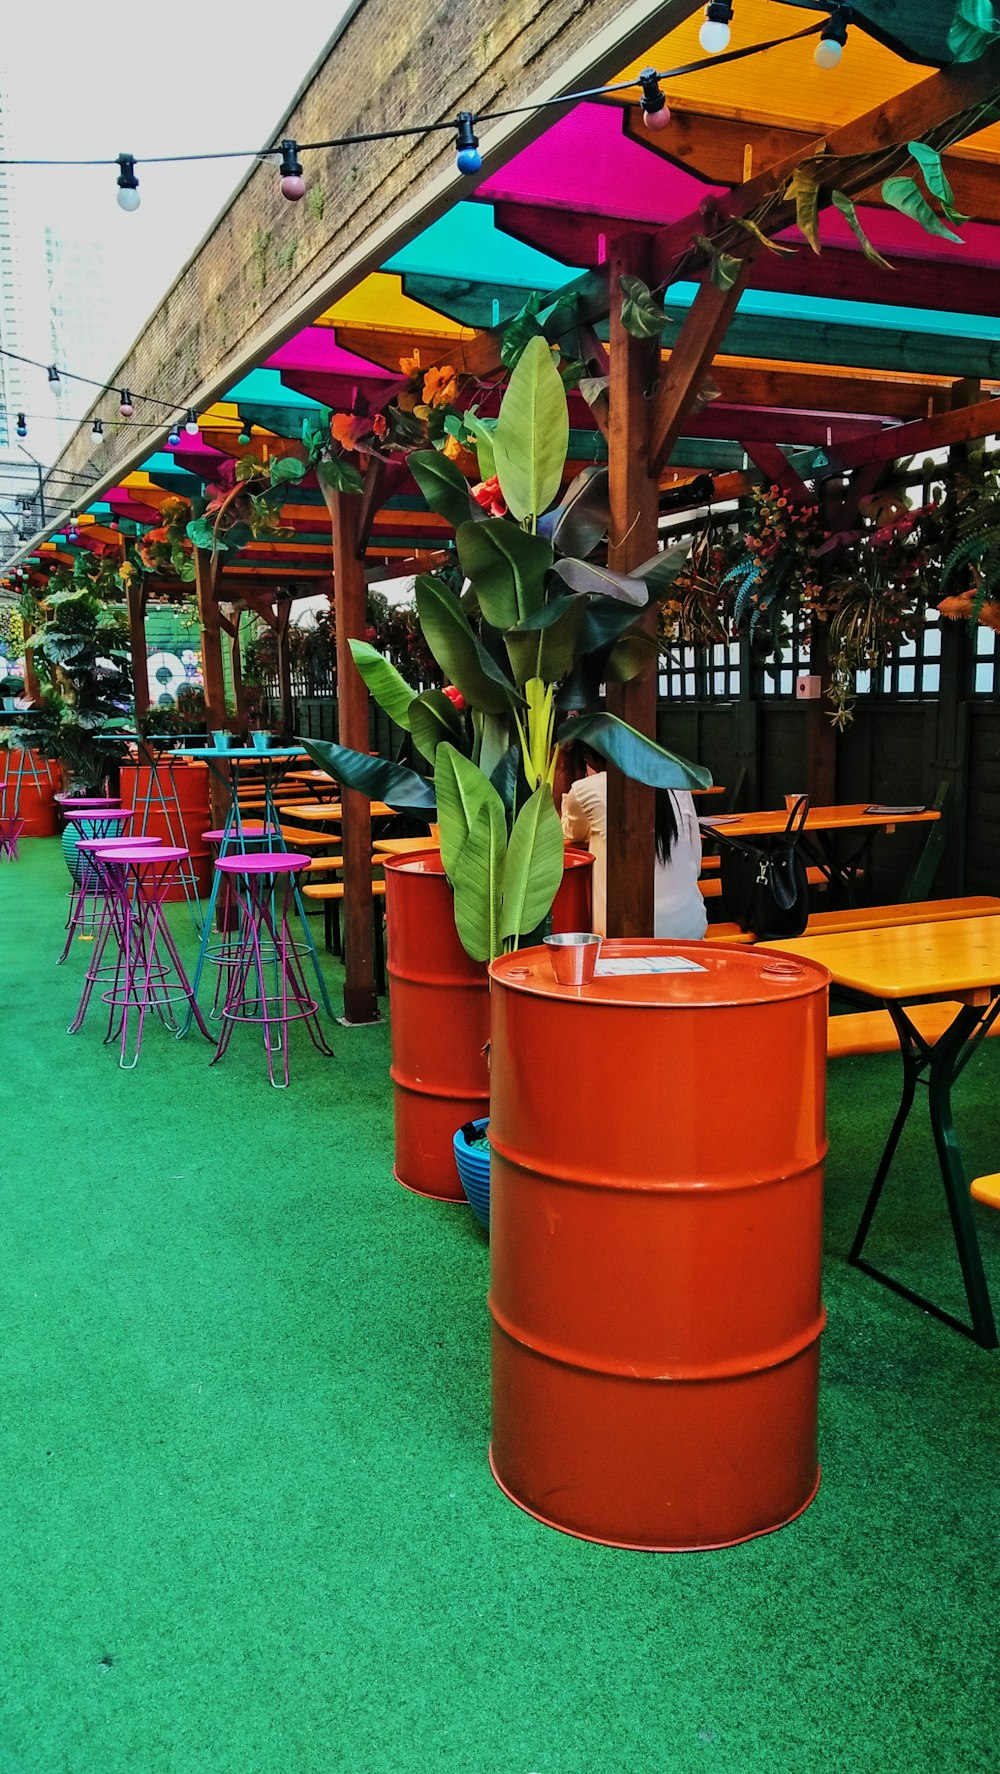 a row of colorful tables with umbrellas over them